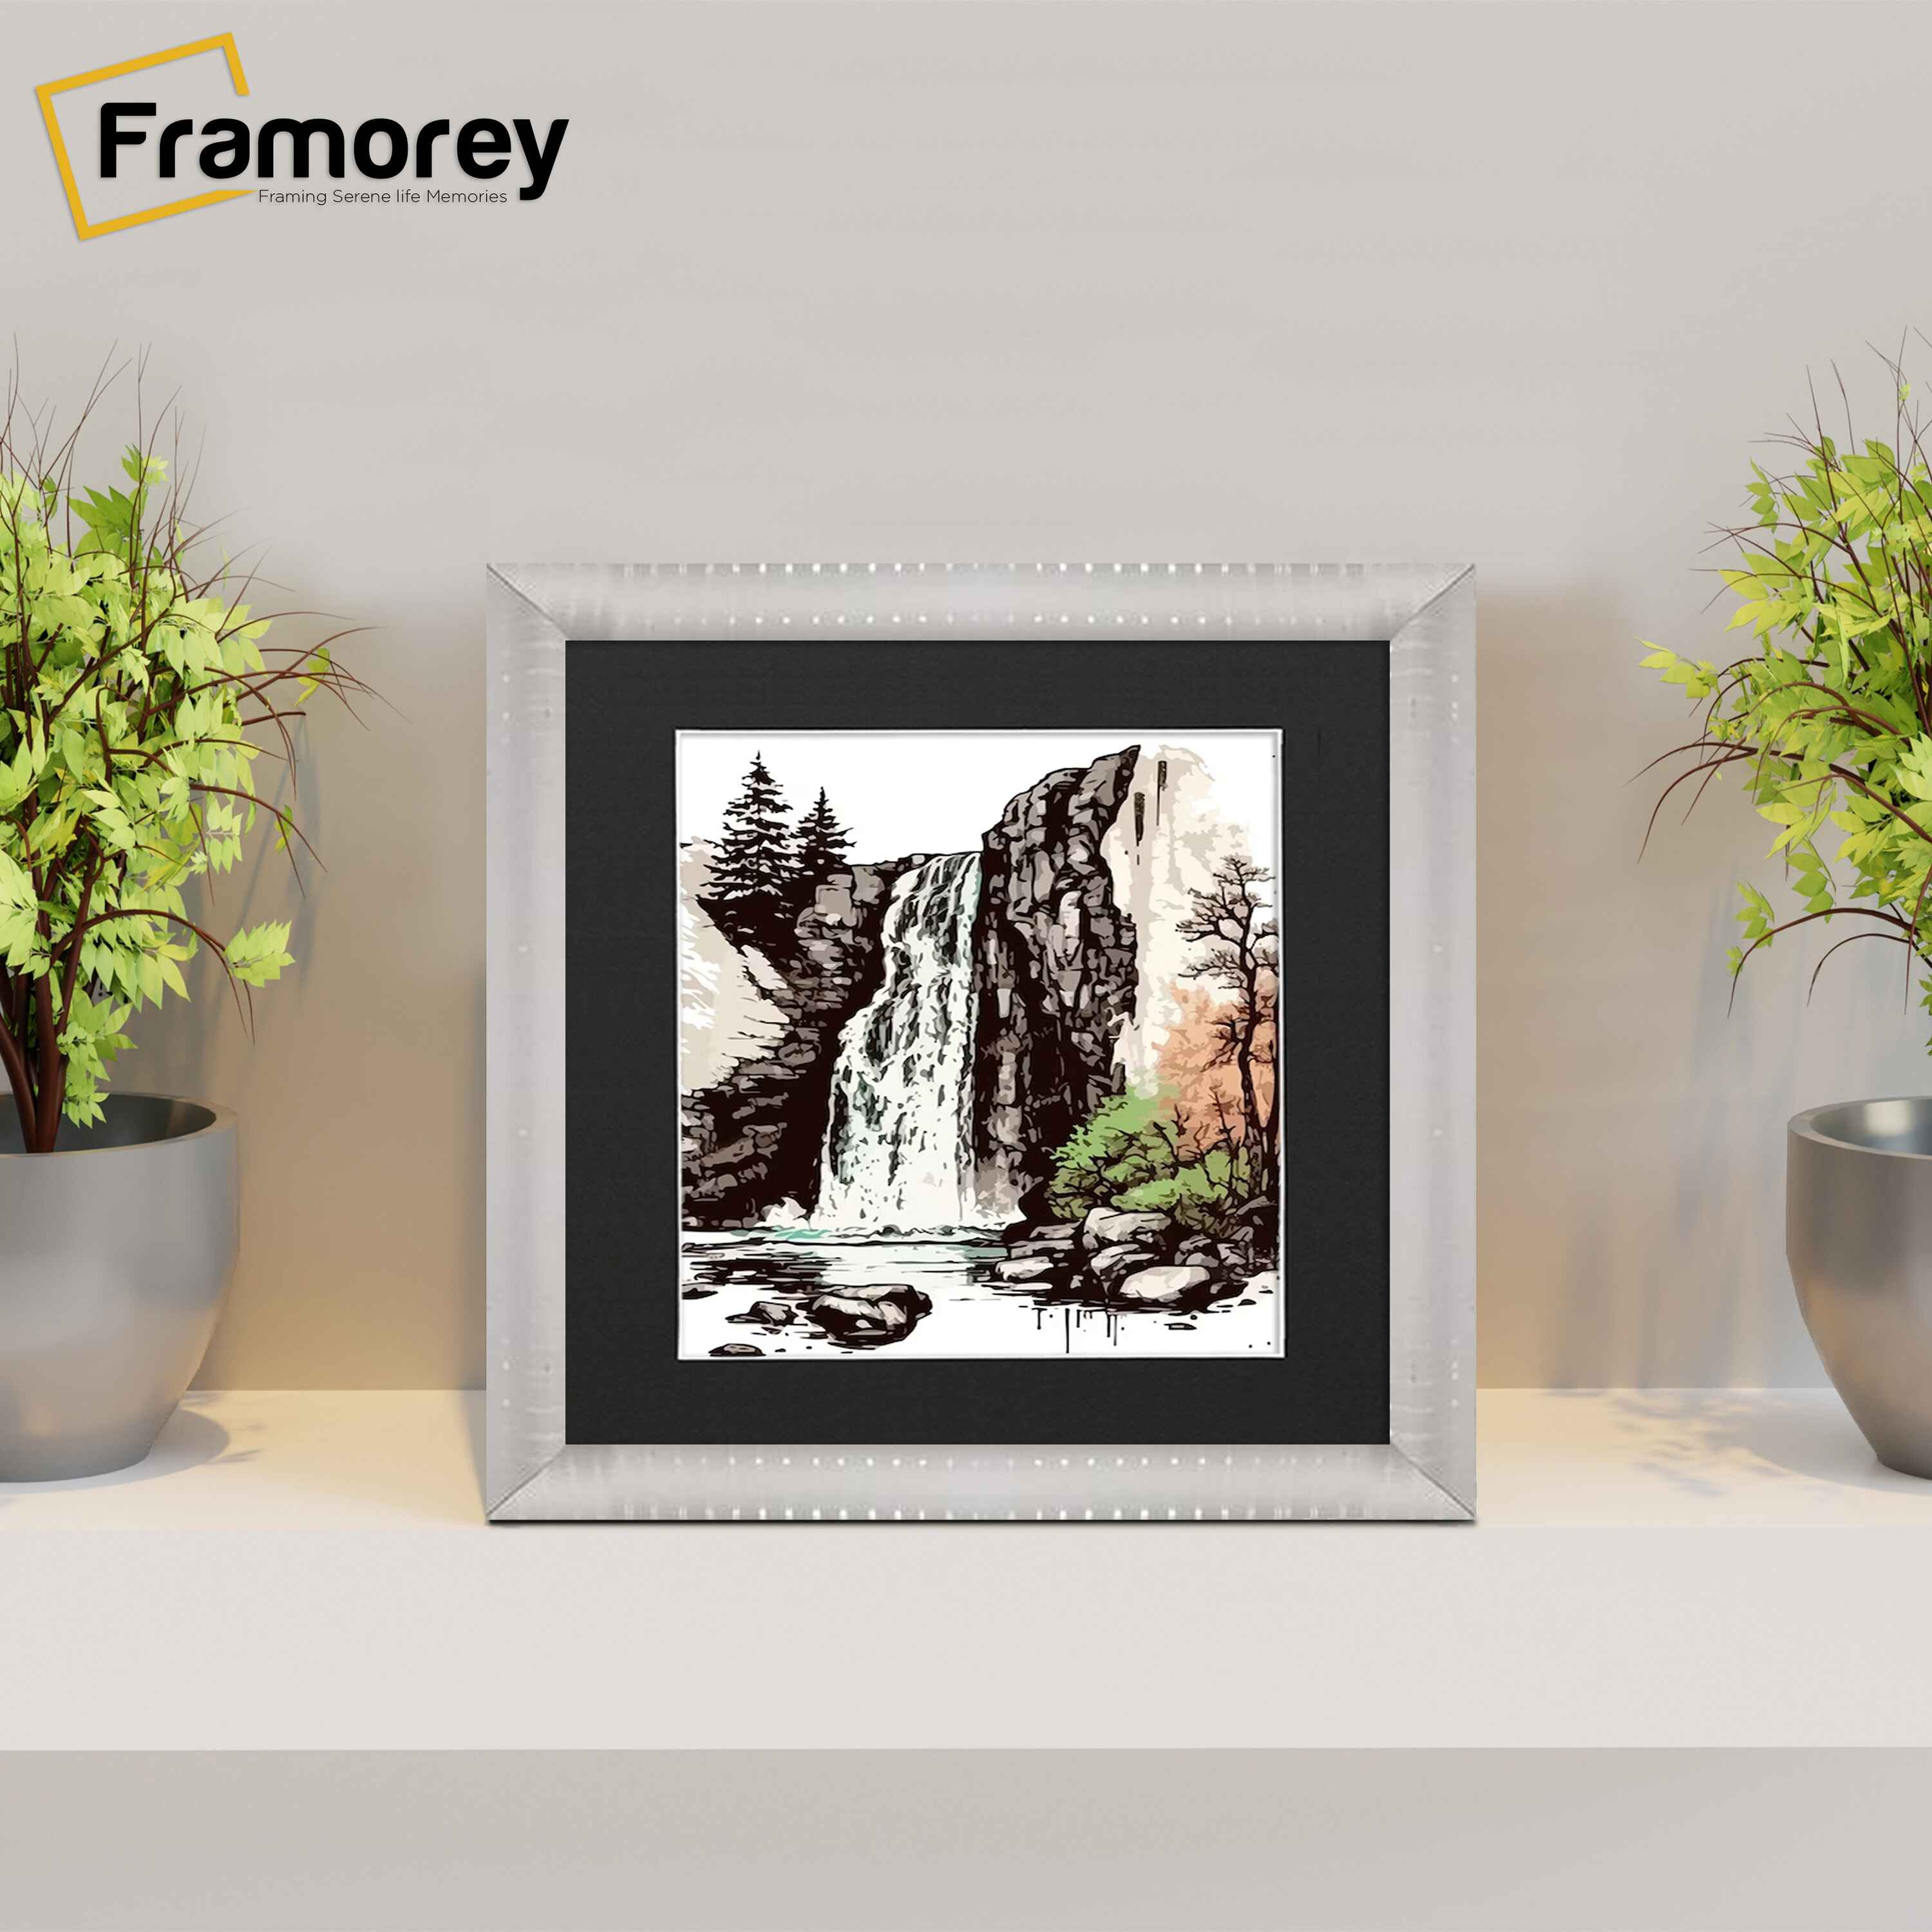 White Wall Hanging Picture Frame Square Size Frame With Black Mount